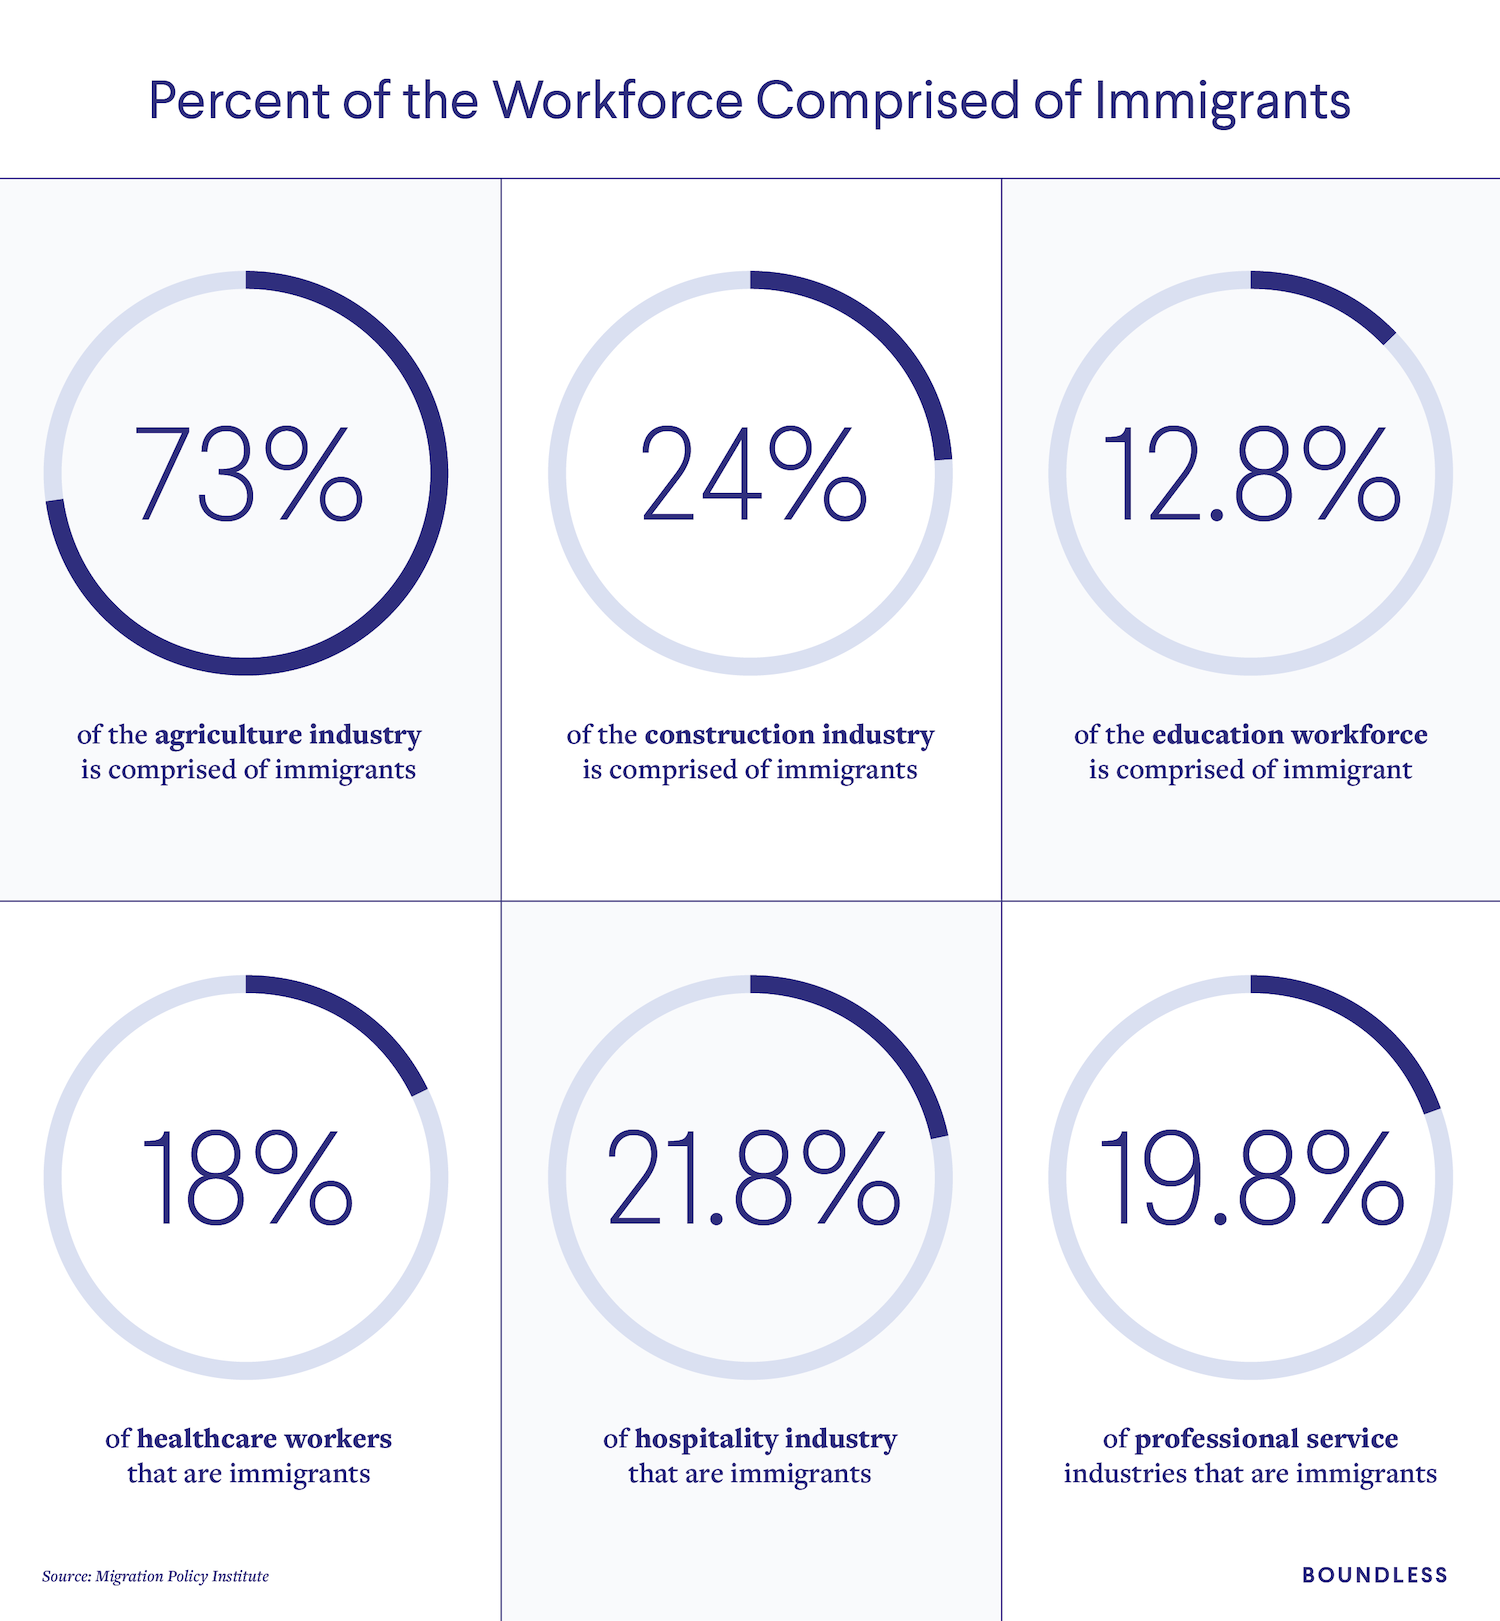 Percent of the Workforce Comprised of Immigrants